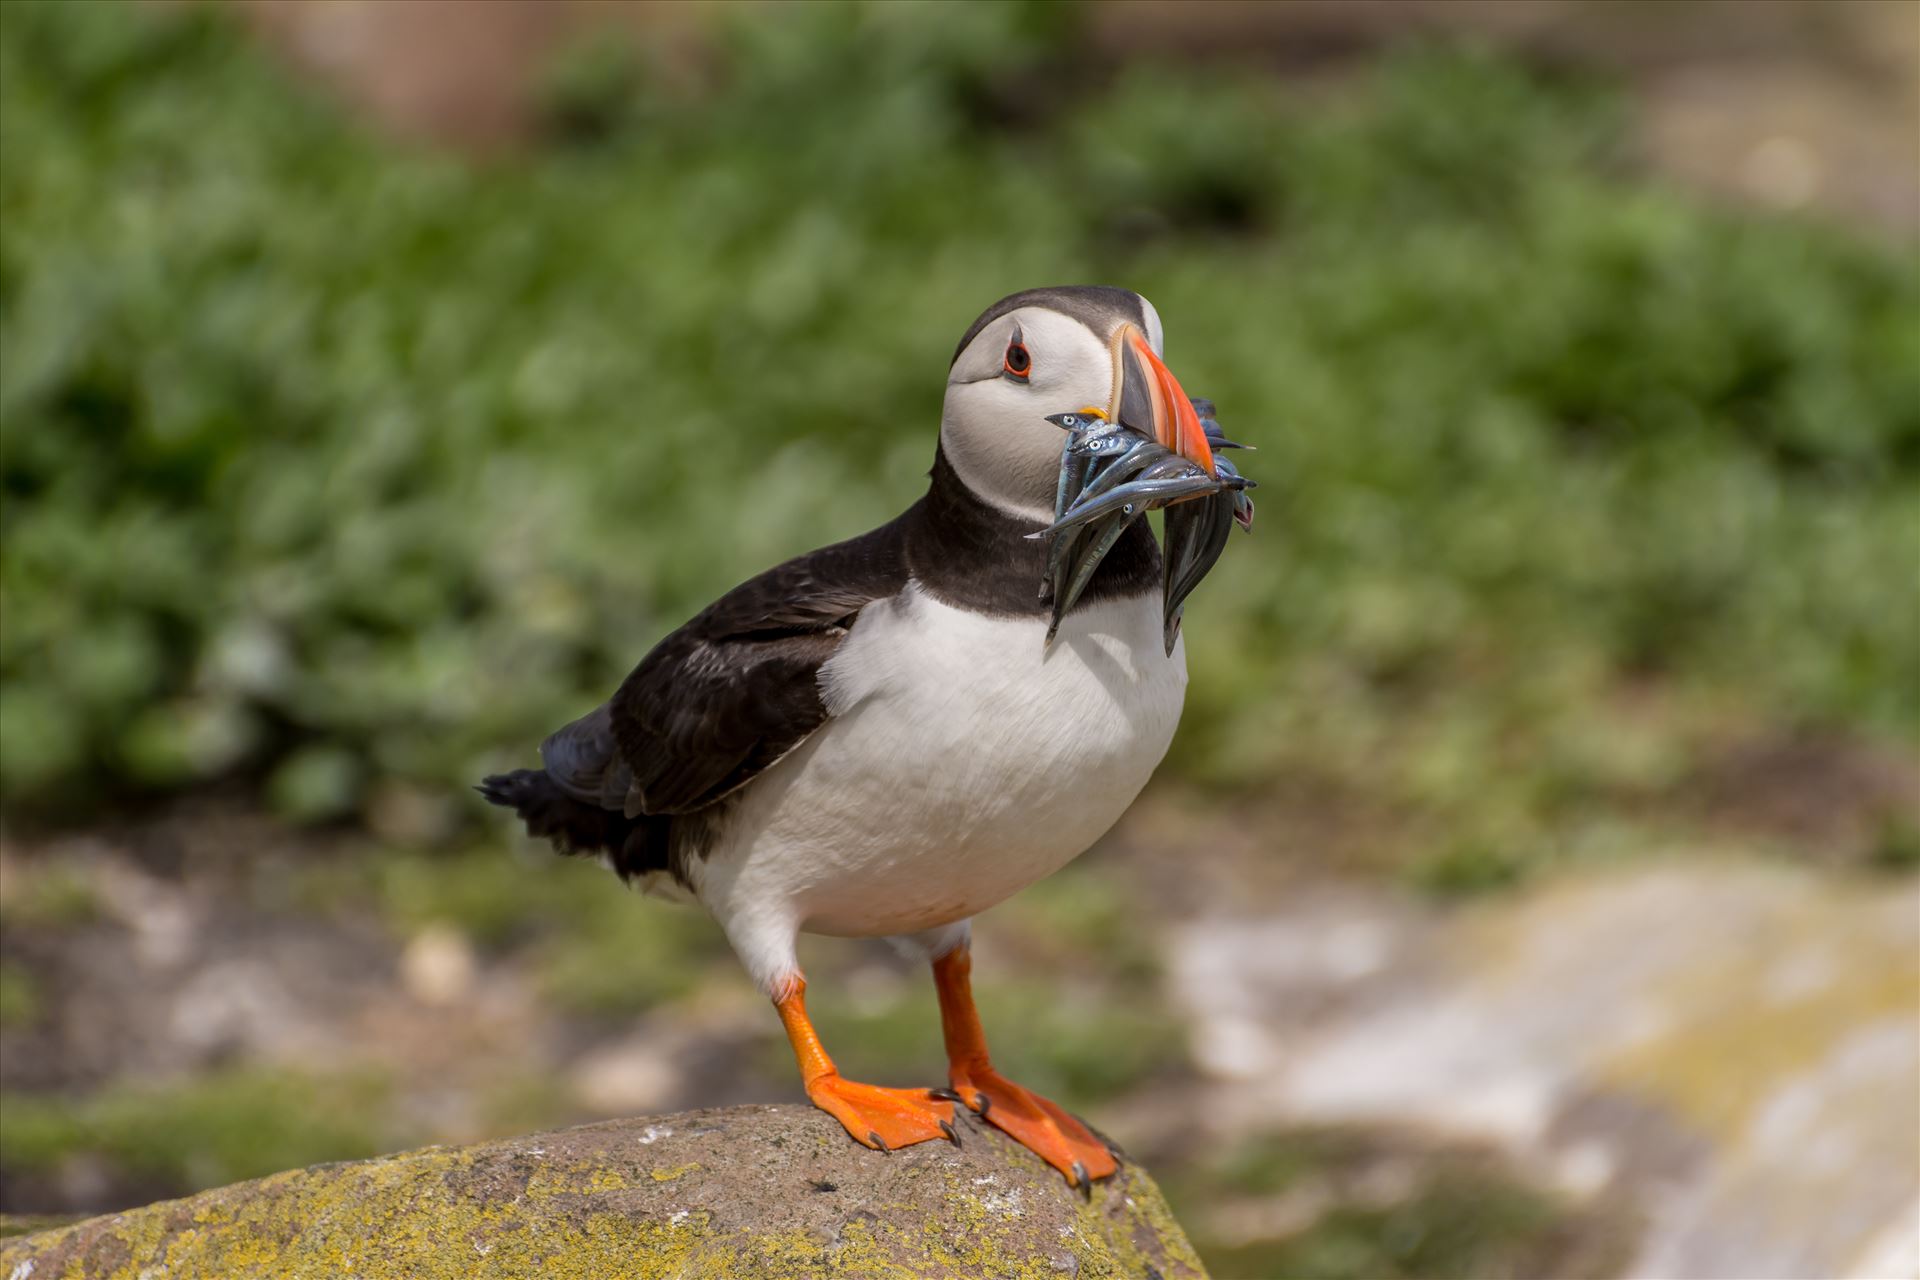 Puffin - Taken on the Farne Islands, off the Northumberland coast. by philreay